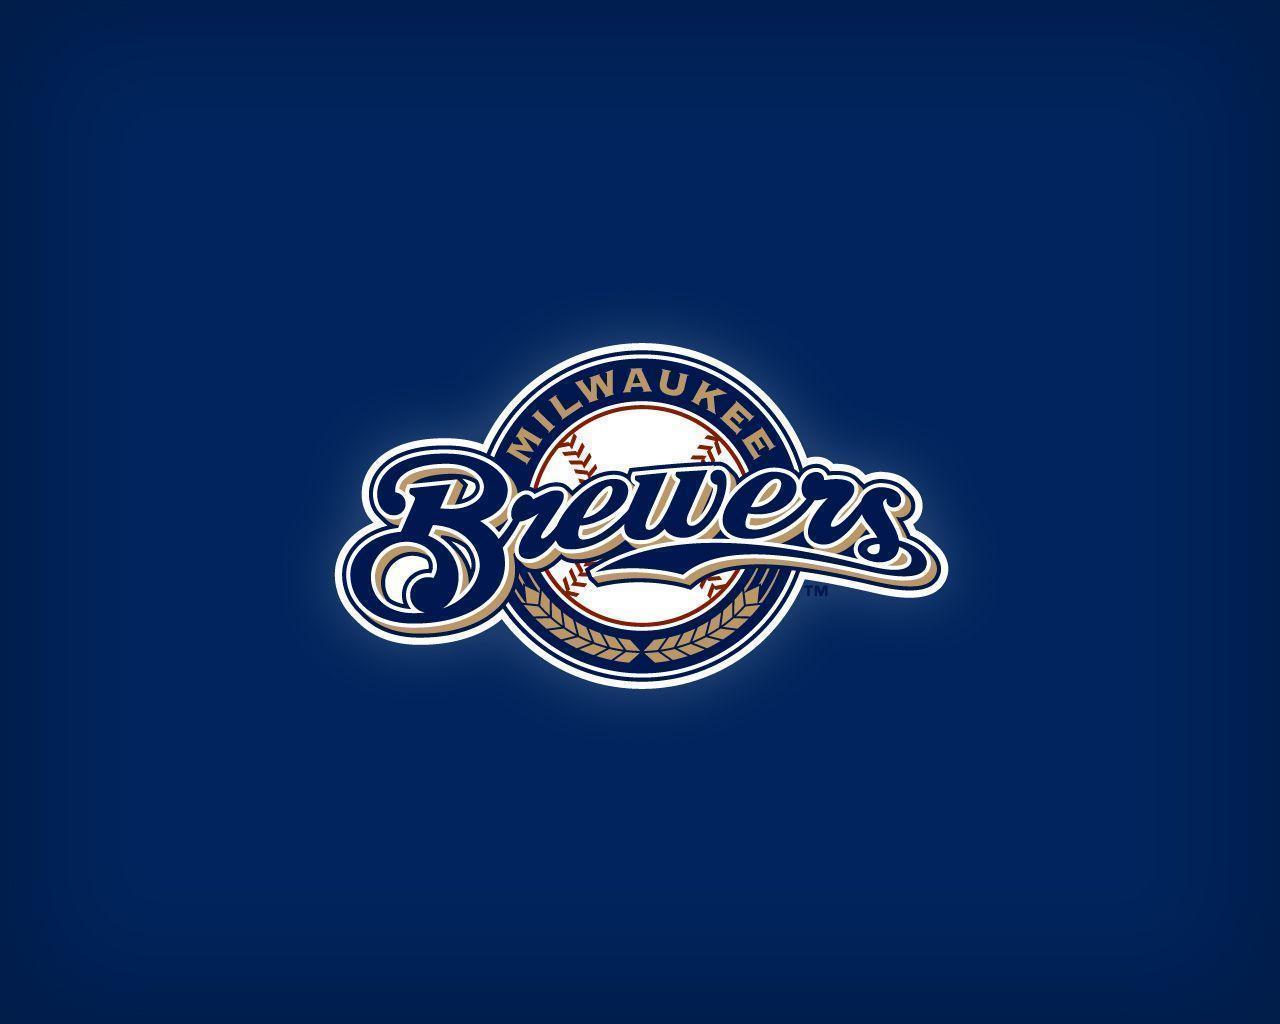 Cool looking 80's style glitch for phone : Brewers, brewers logo HD phone  wallpaper